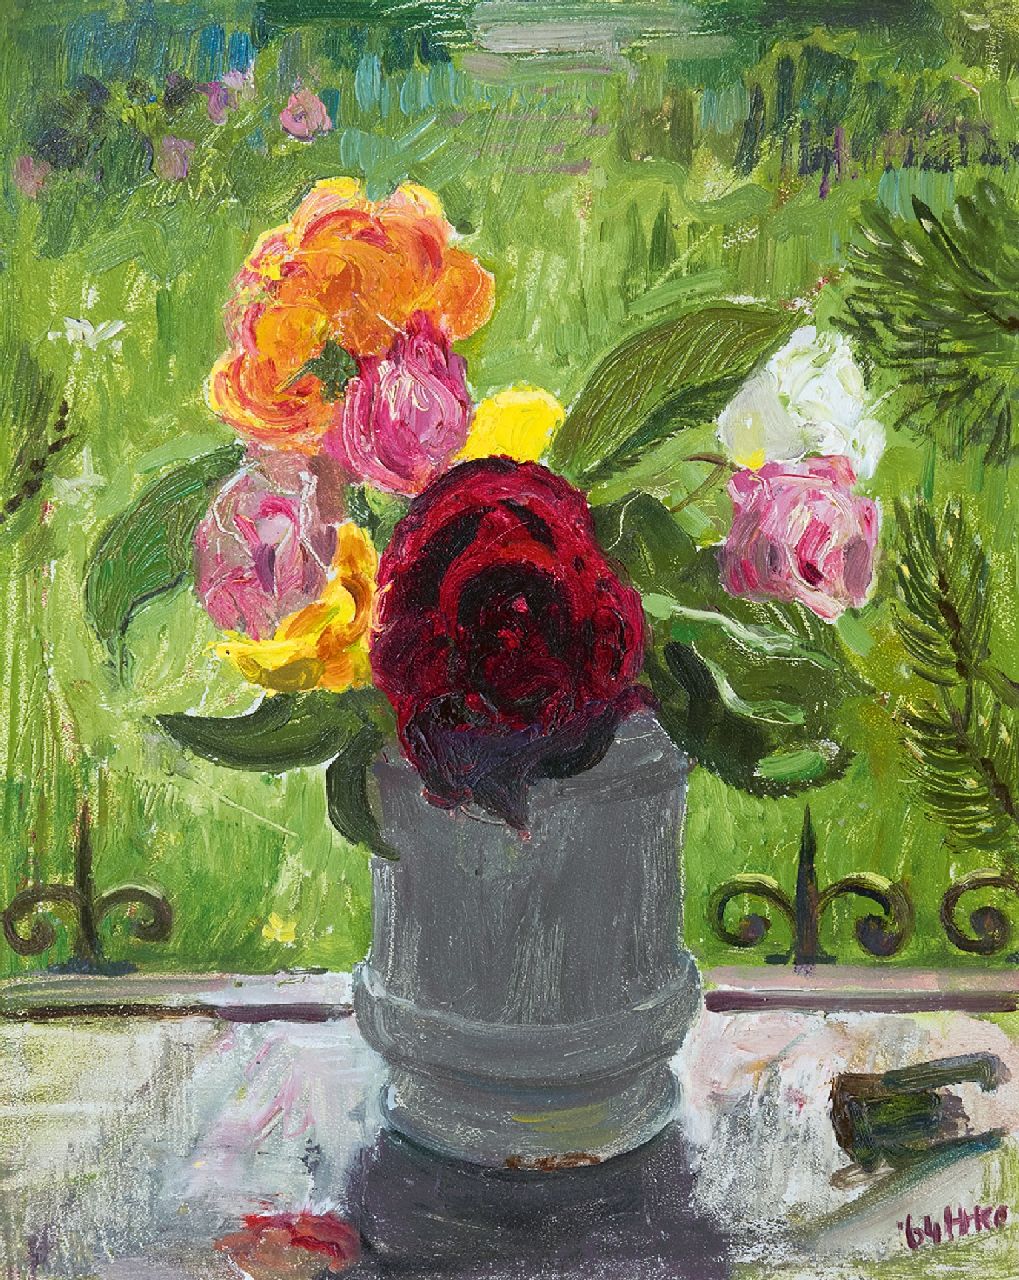 Kamerlingh Onnes H.H.  | 'Harm' Henrick Kamerlingh Onnes, Roses on a window sill, oil on panel 30.5 x 24.6 cm, signed l.r. with monogram and dated '64